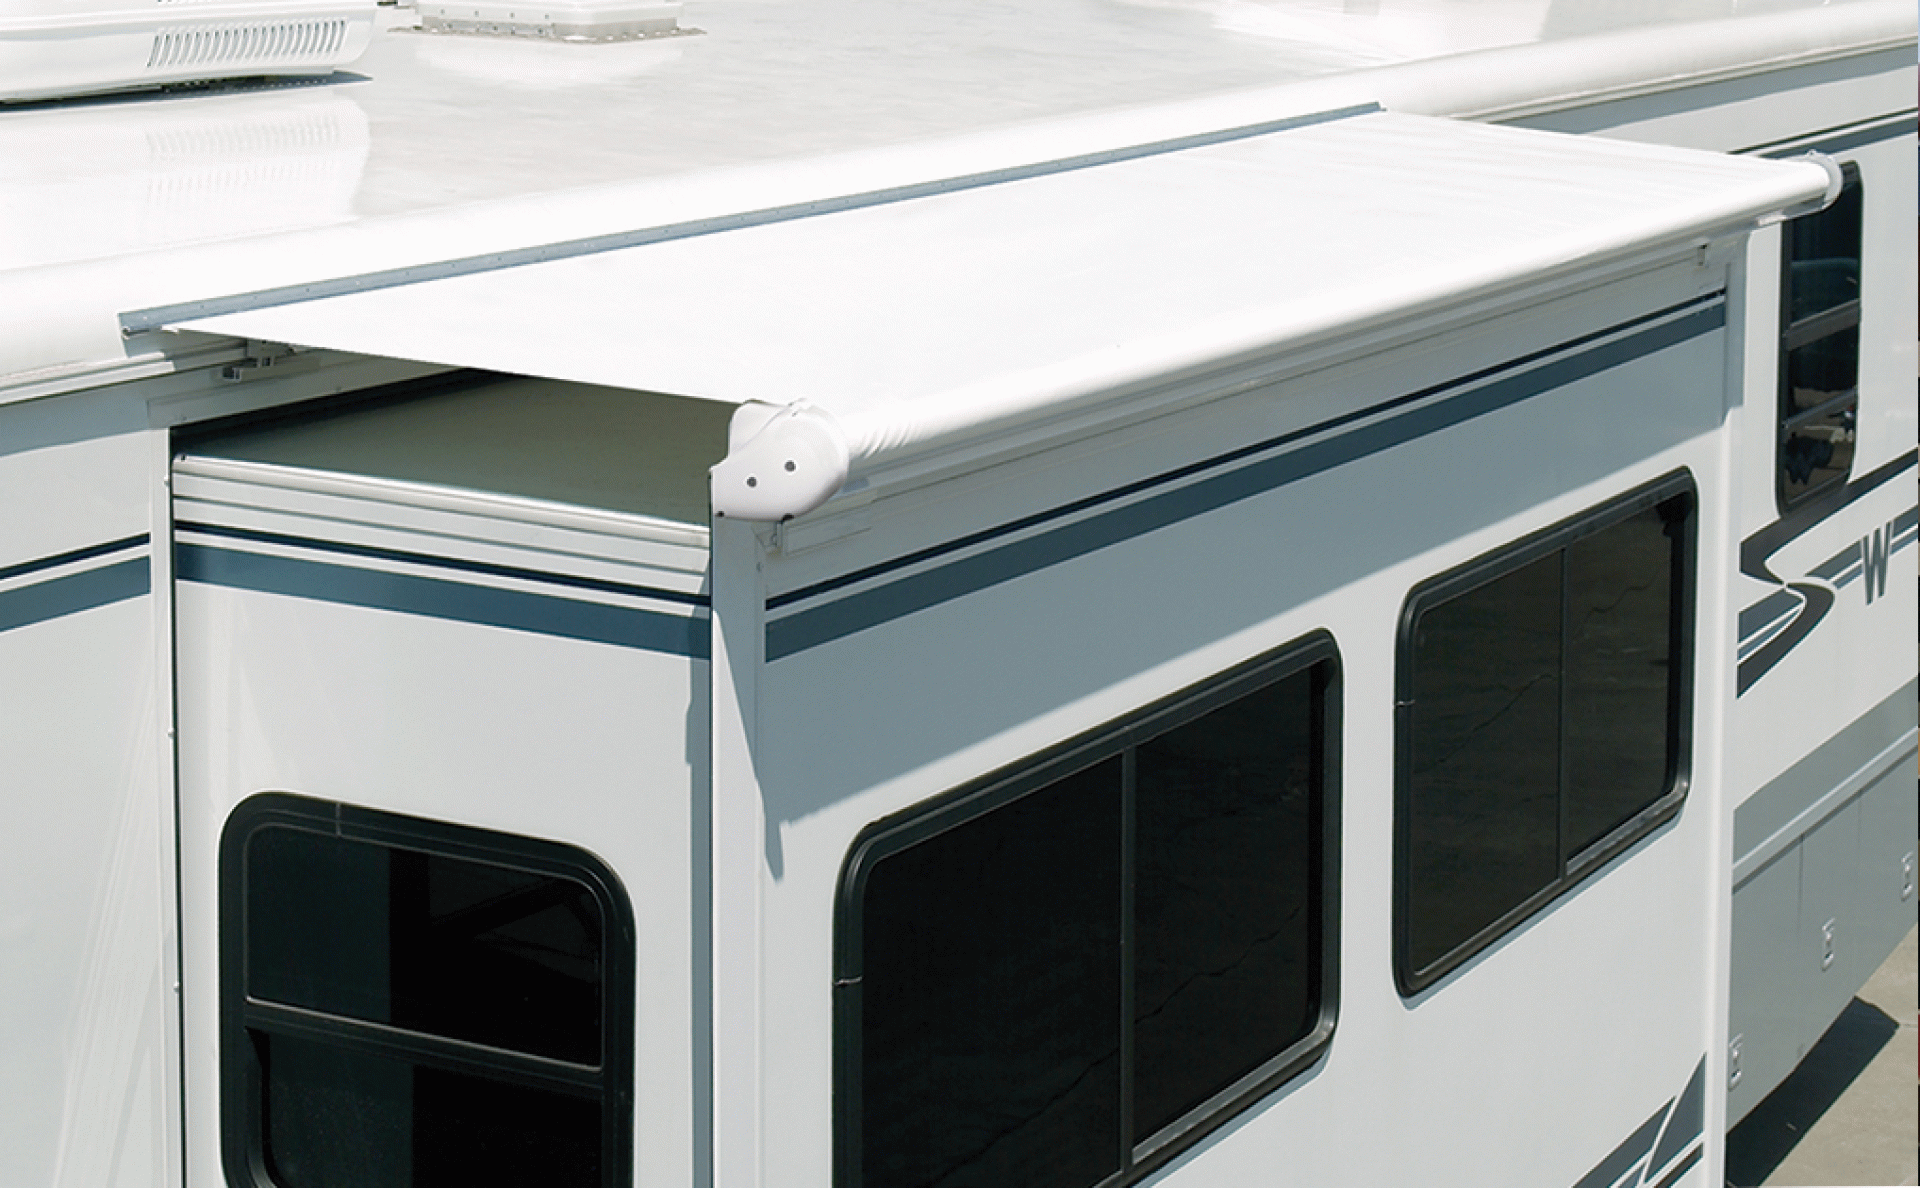 CAREFREE OF COLORADO | UQ1570025 | SIDEOUT KOVER III AWNING 150" - 157" ROOF RANGE WHITE VINYL FABRIC & DEFLECTOR